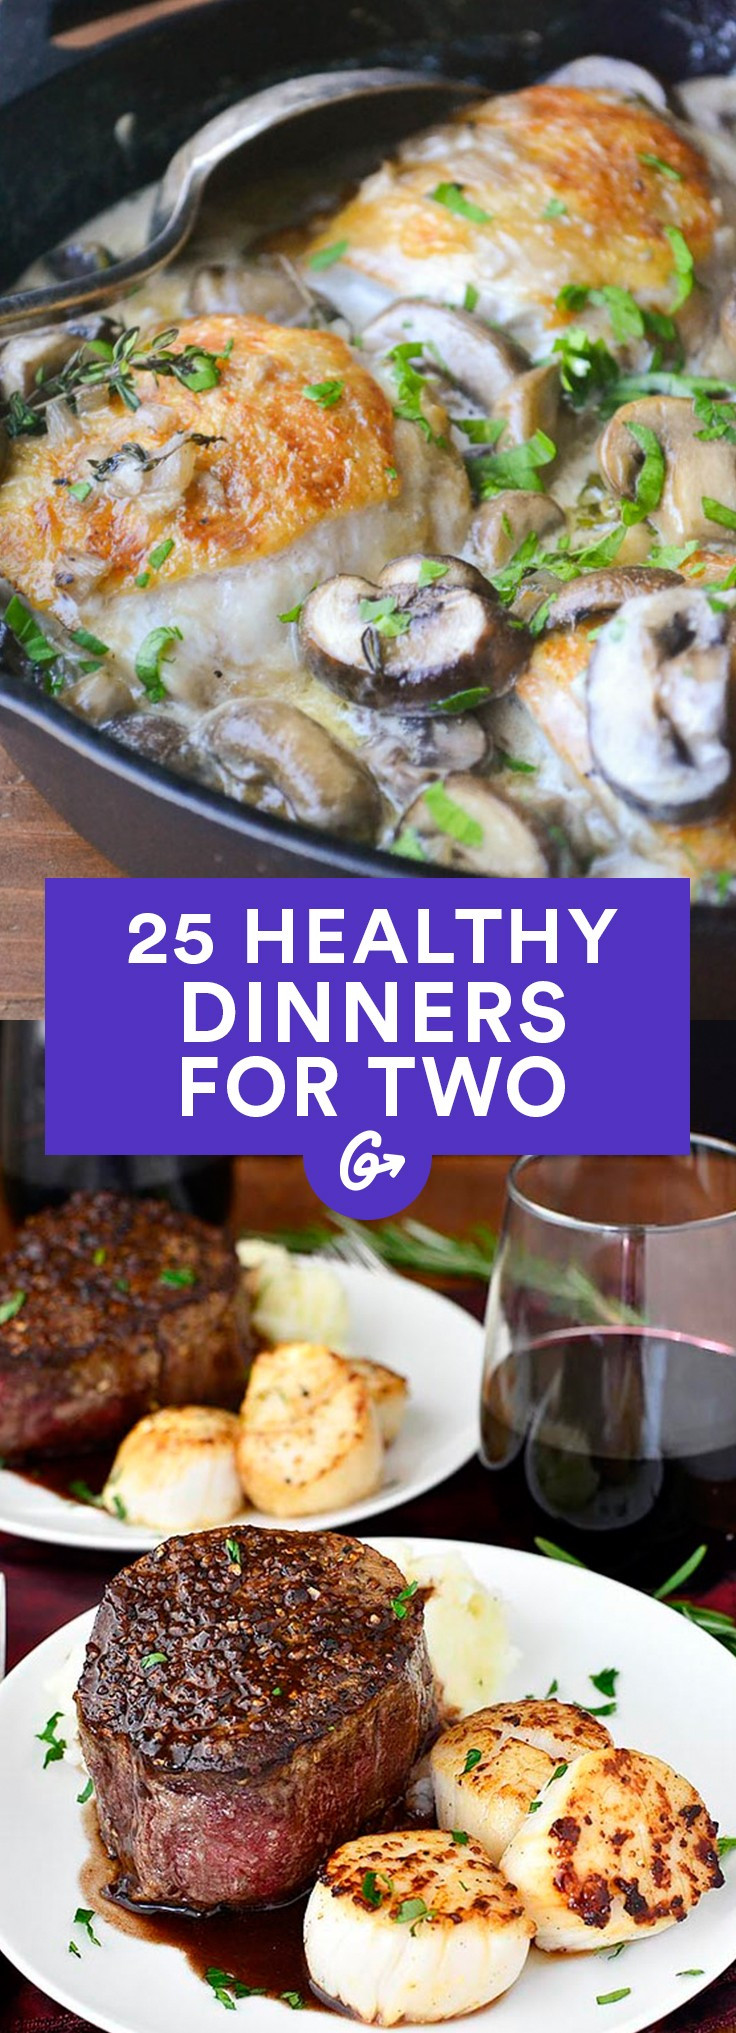 Healthy Dinner Ideas for Two 20 Best Healthy Dinner Recipes for Two